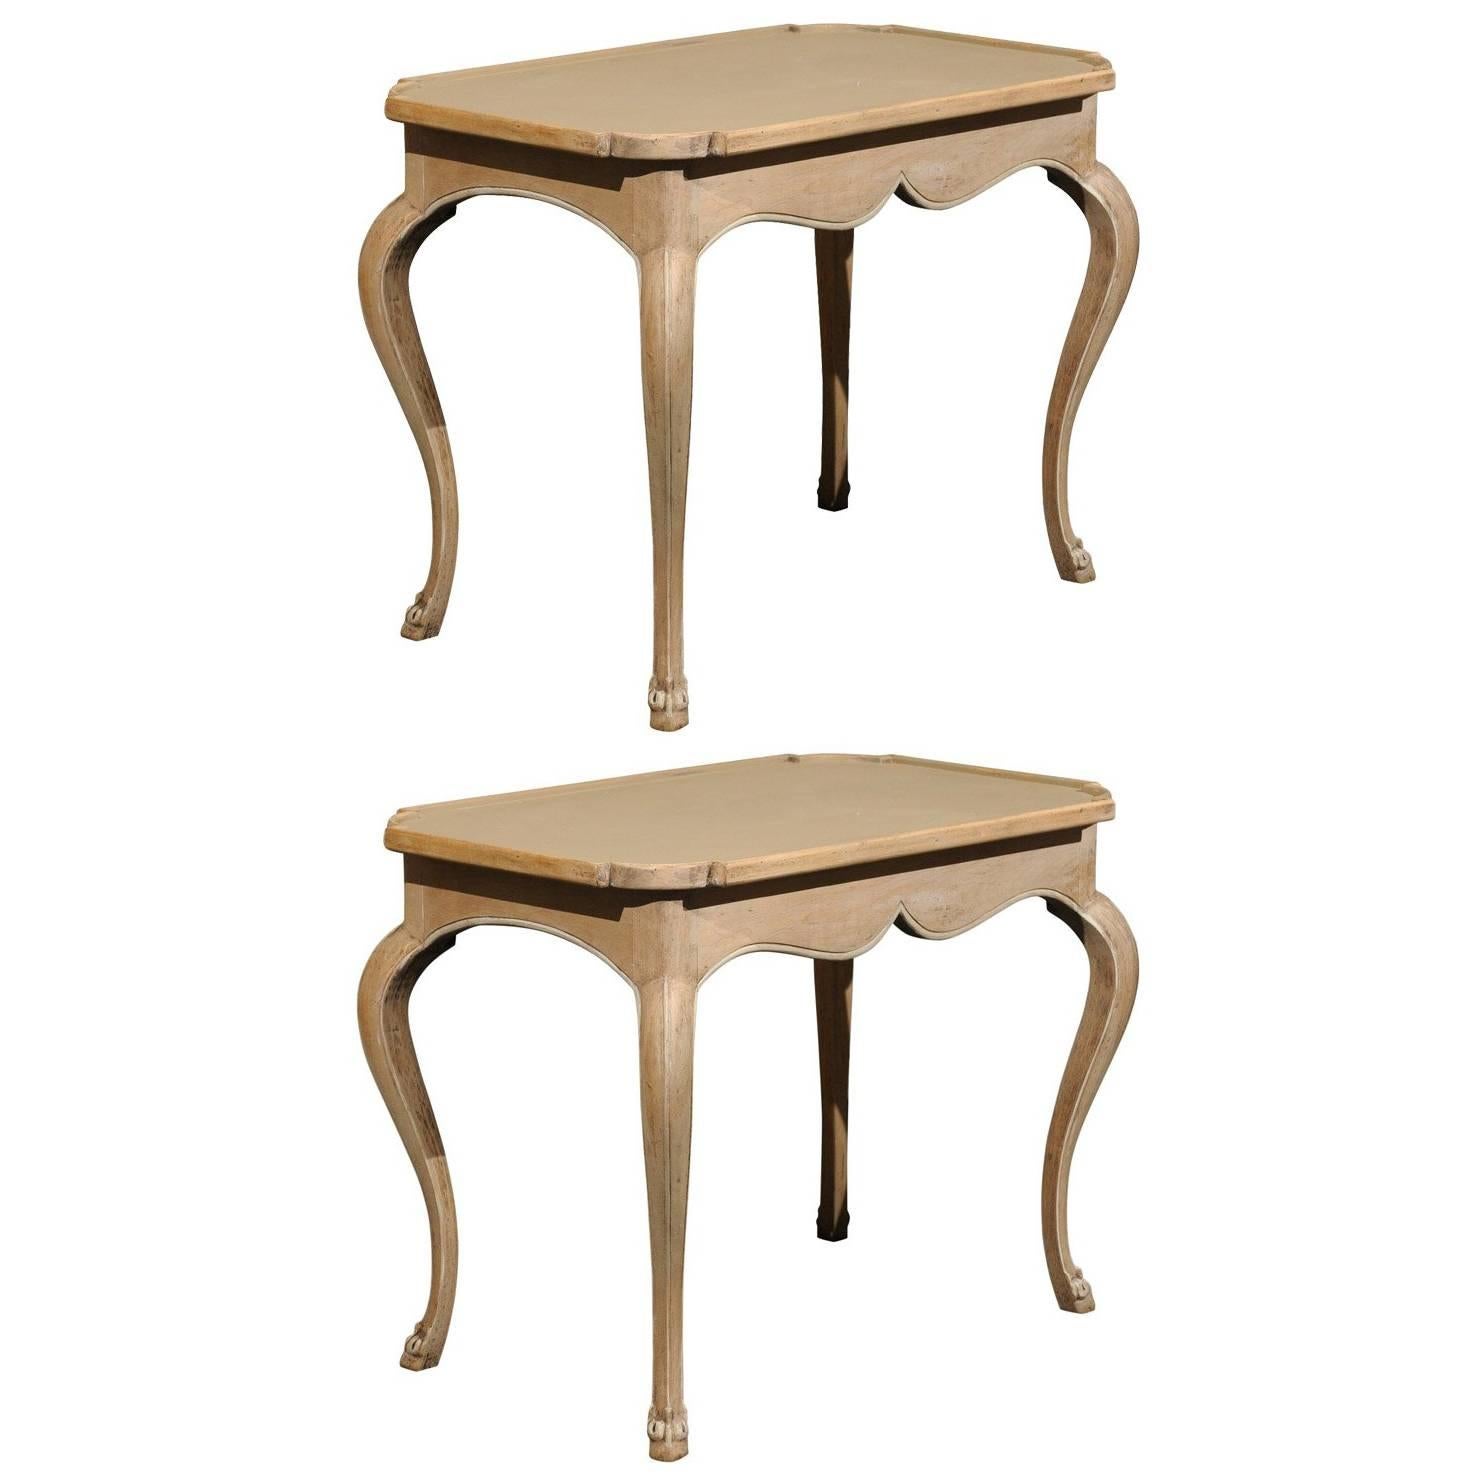 Pair of French Painted Wood Tray Top Side Tables with Cabriole Legs